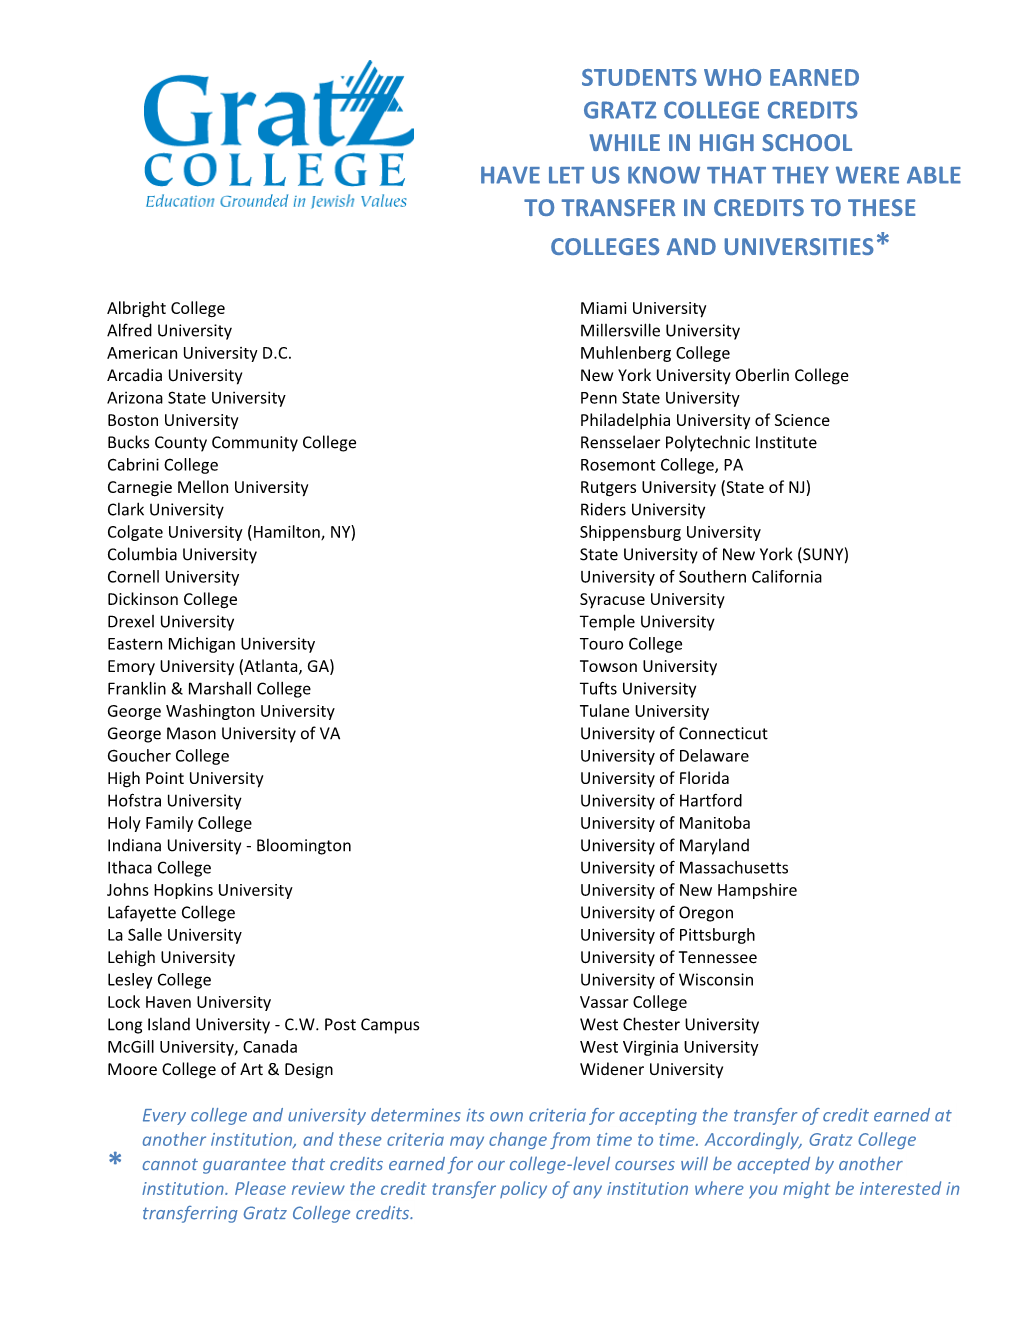 Students Who Earned Gratz College Credits While in High School Have Let Us Know That They Were Able to Transfer in Credits to These Colleges and Universities*